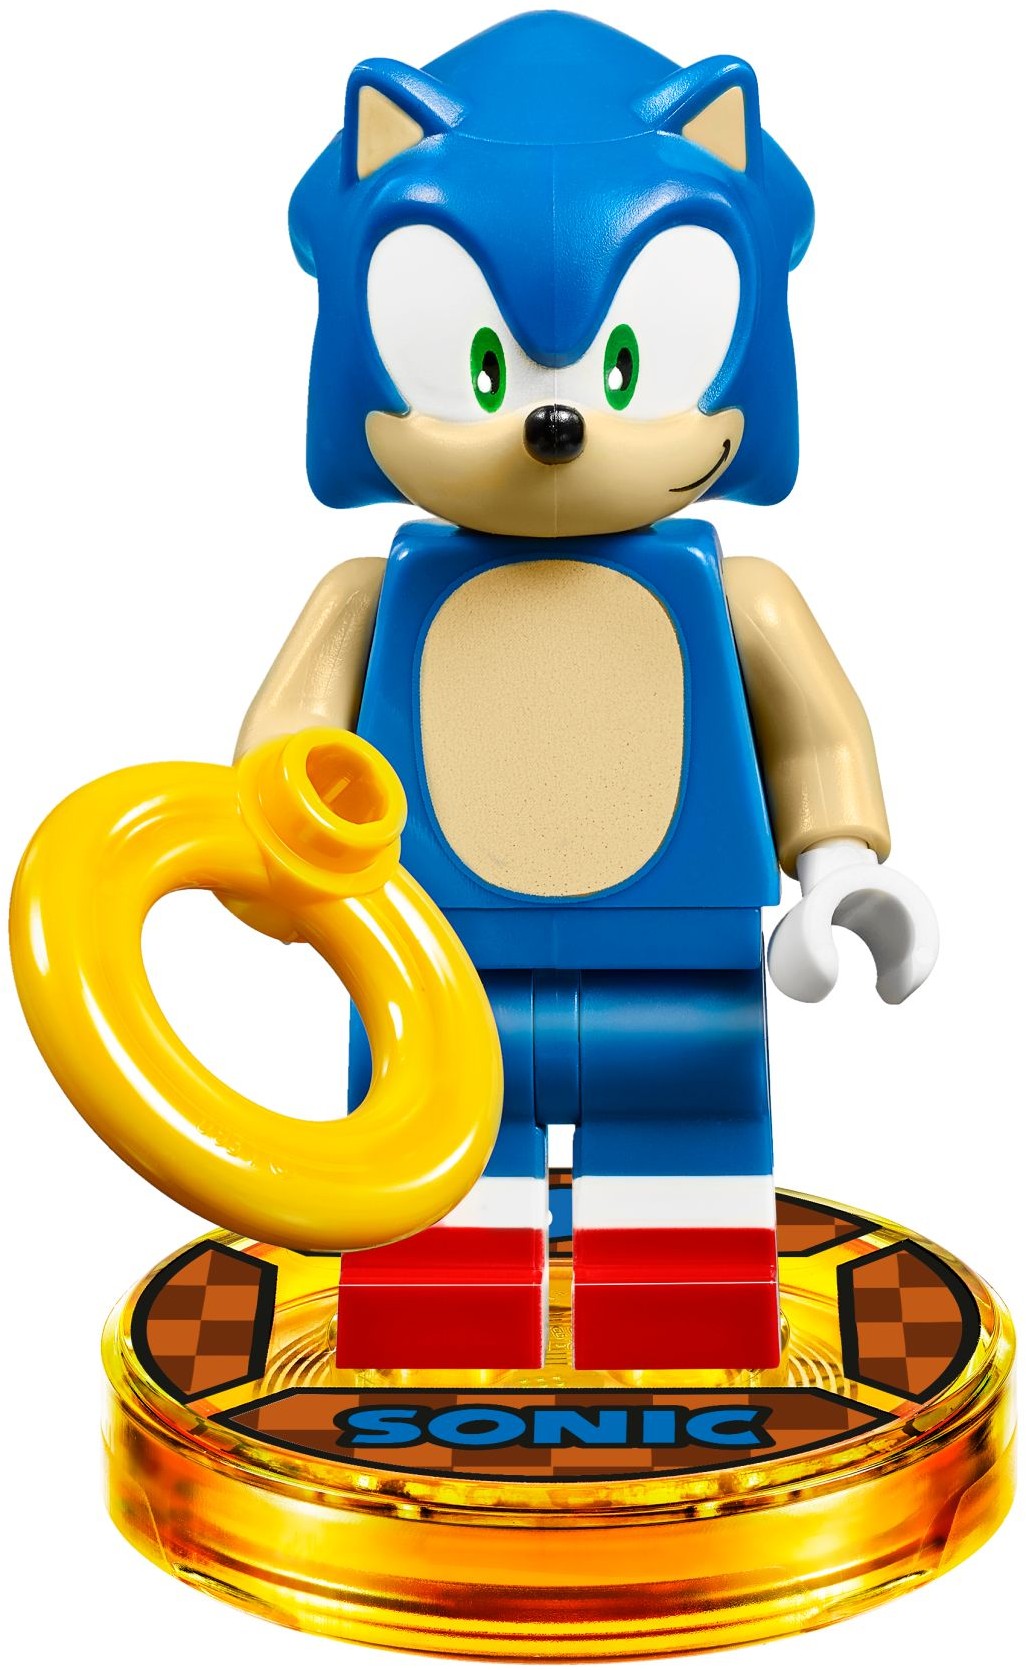 Brand New LEGO Dimensions Sonic the Hedgehog Level Pack (71244)